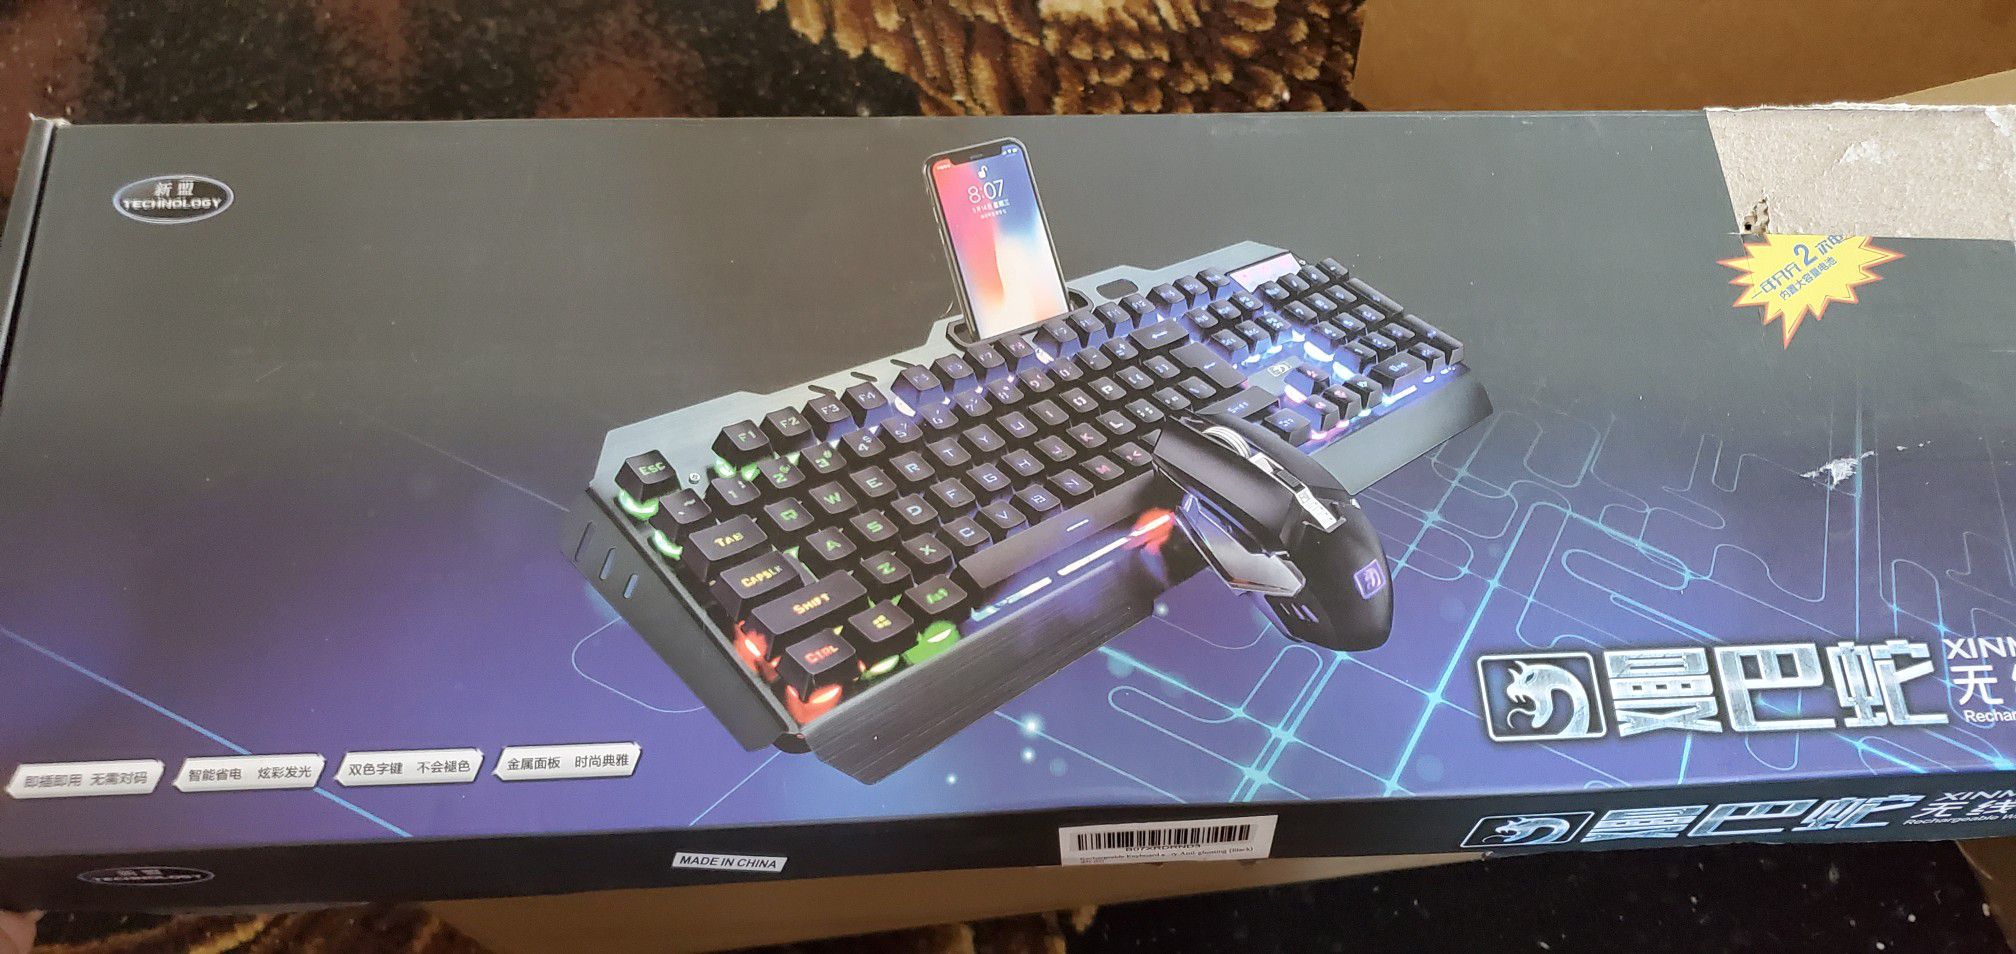 Gamers keyboard with mouse